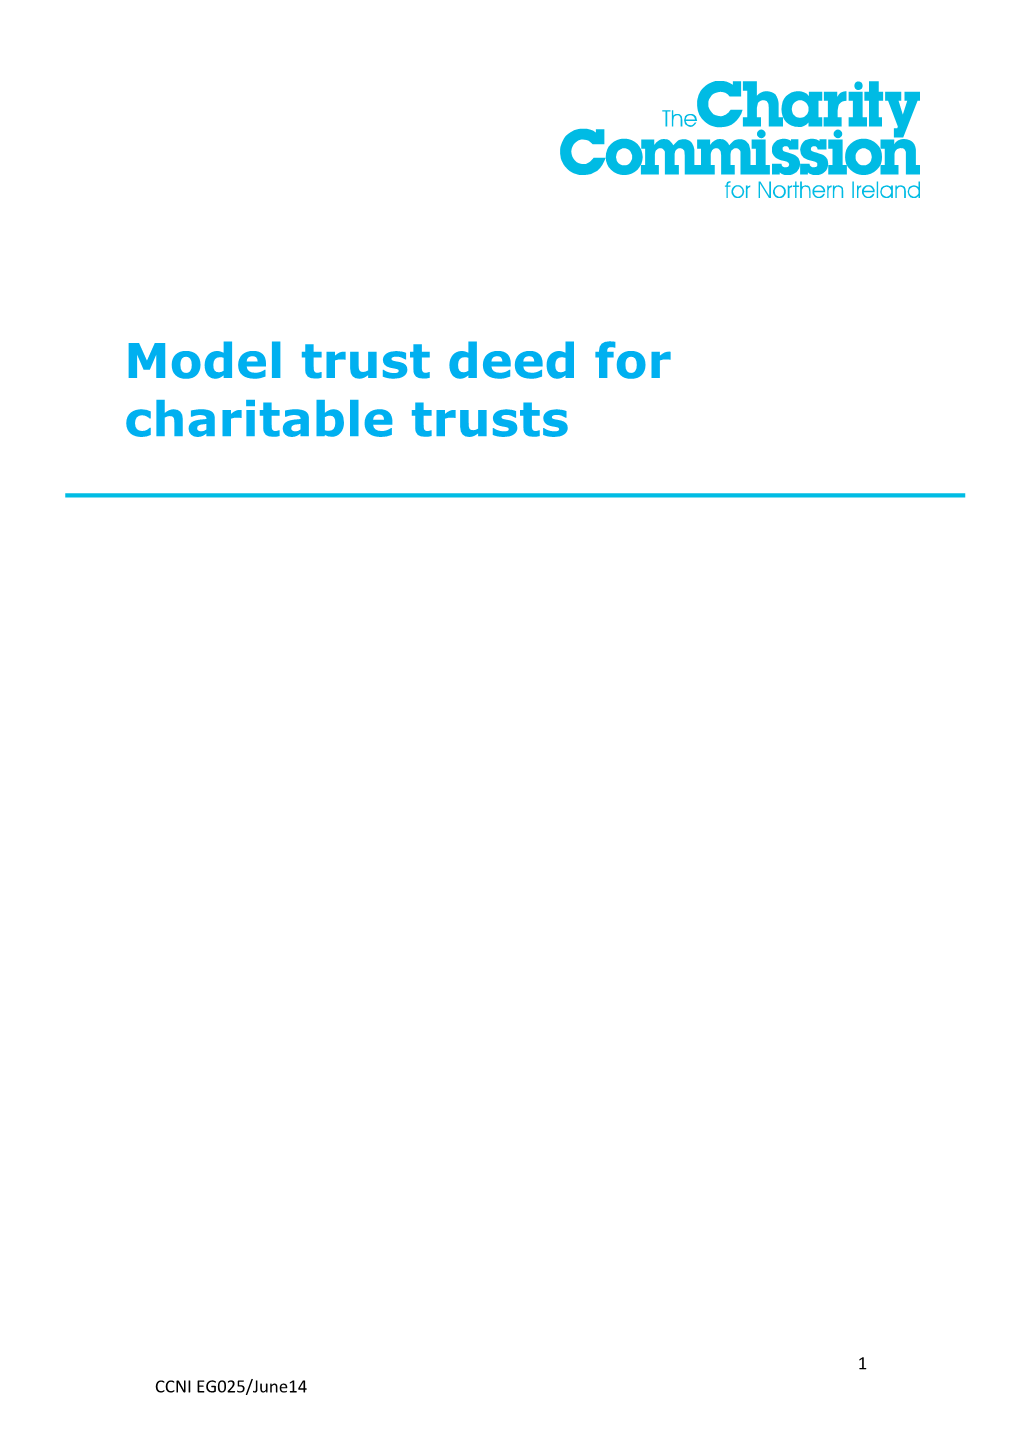 Model Trust Deed for Charitable Trusts